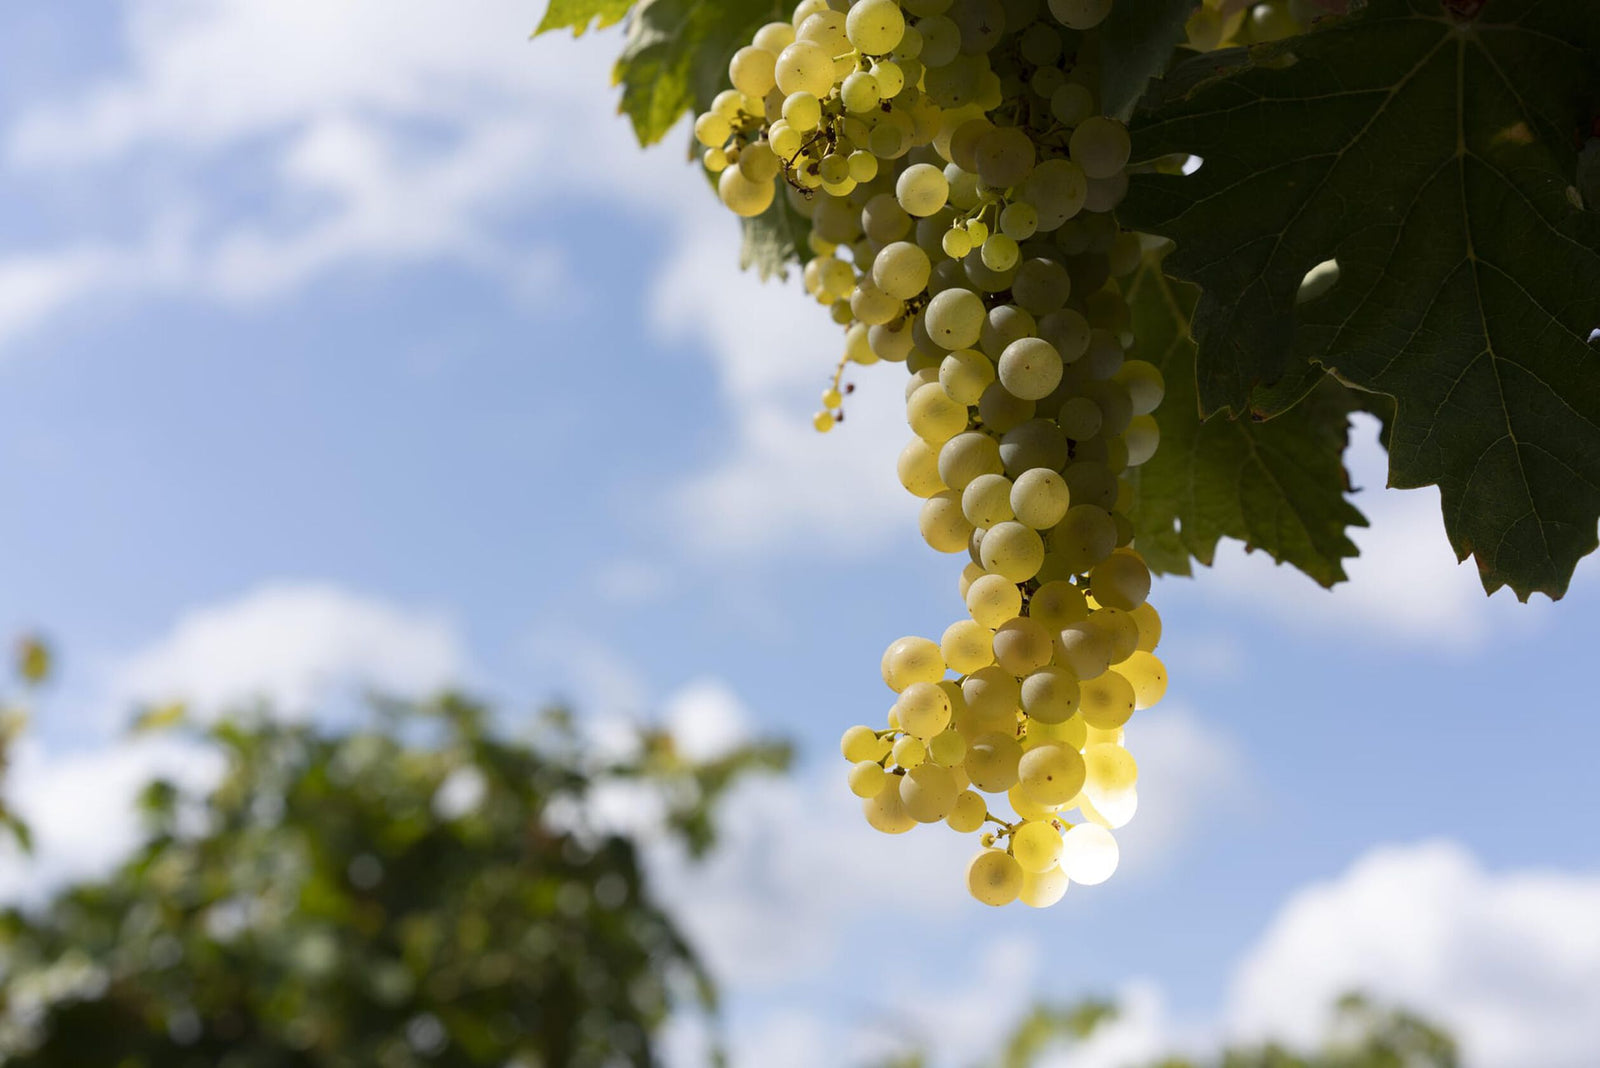 A nature photo of green grapes lit by the sun, blue sky behind